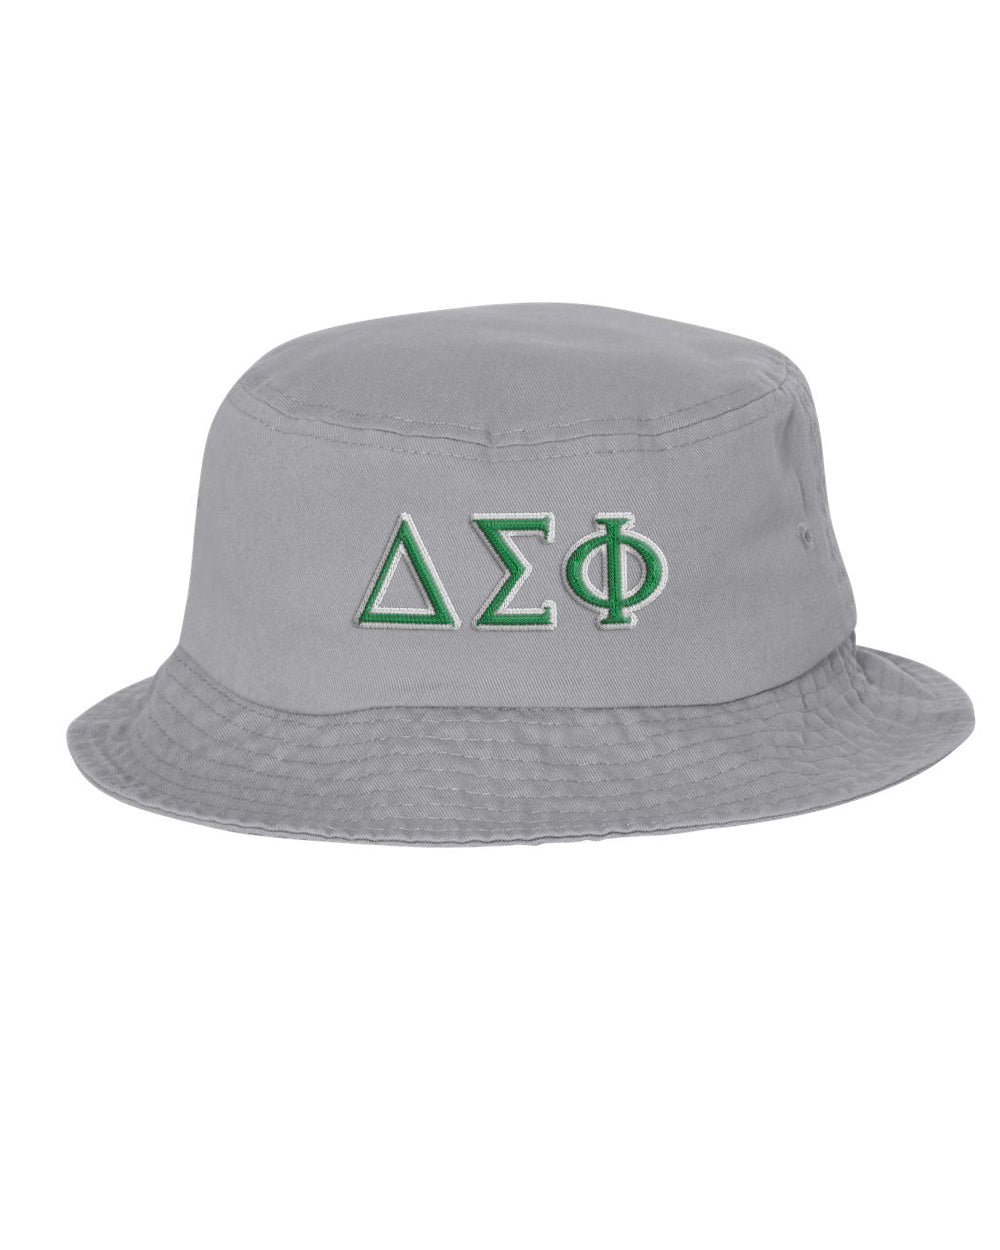 Delta Sigma Phi Embroidered Bucket Hat